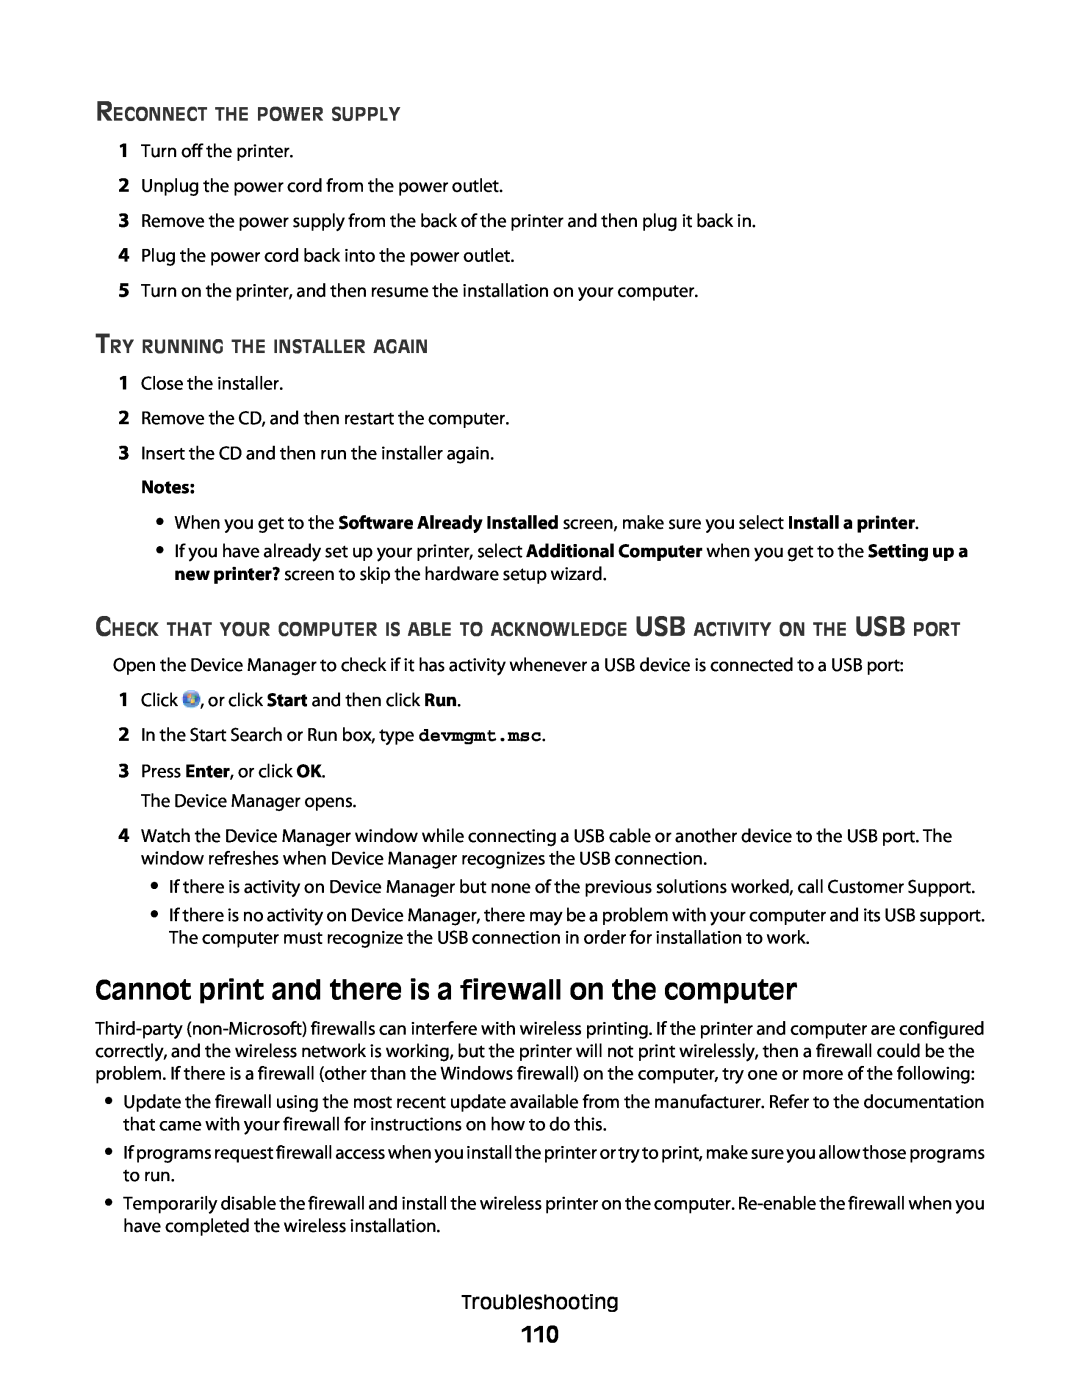 Lexmark 301, S500, 30E manual Cannot print and there is a firewall on the computer, Reconnect The Power Supply 